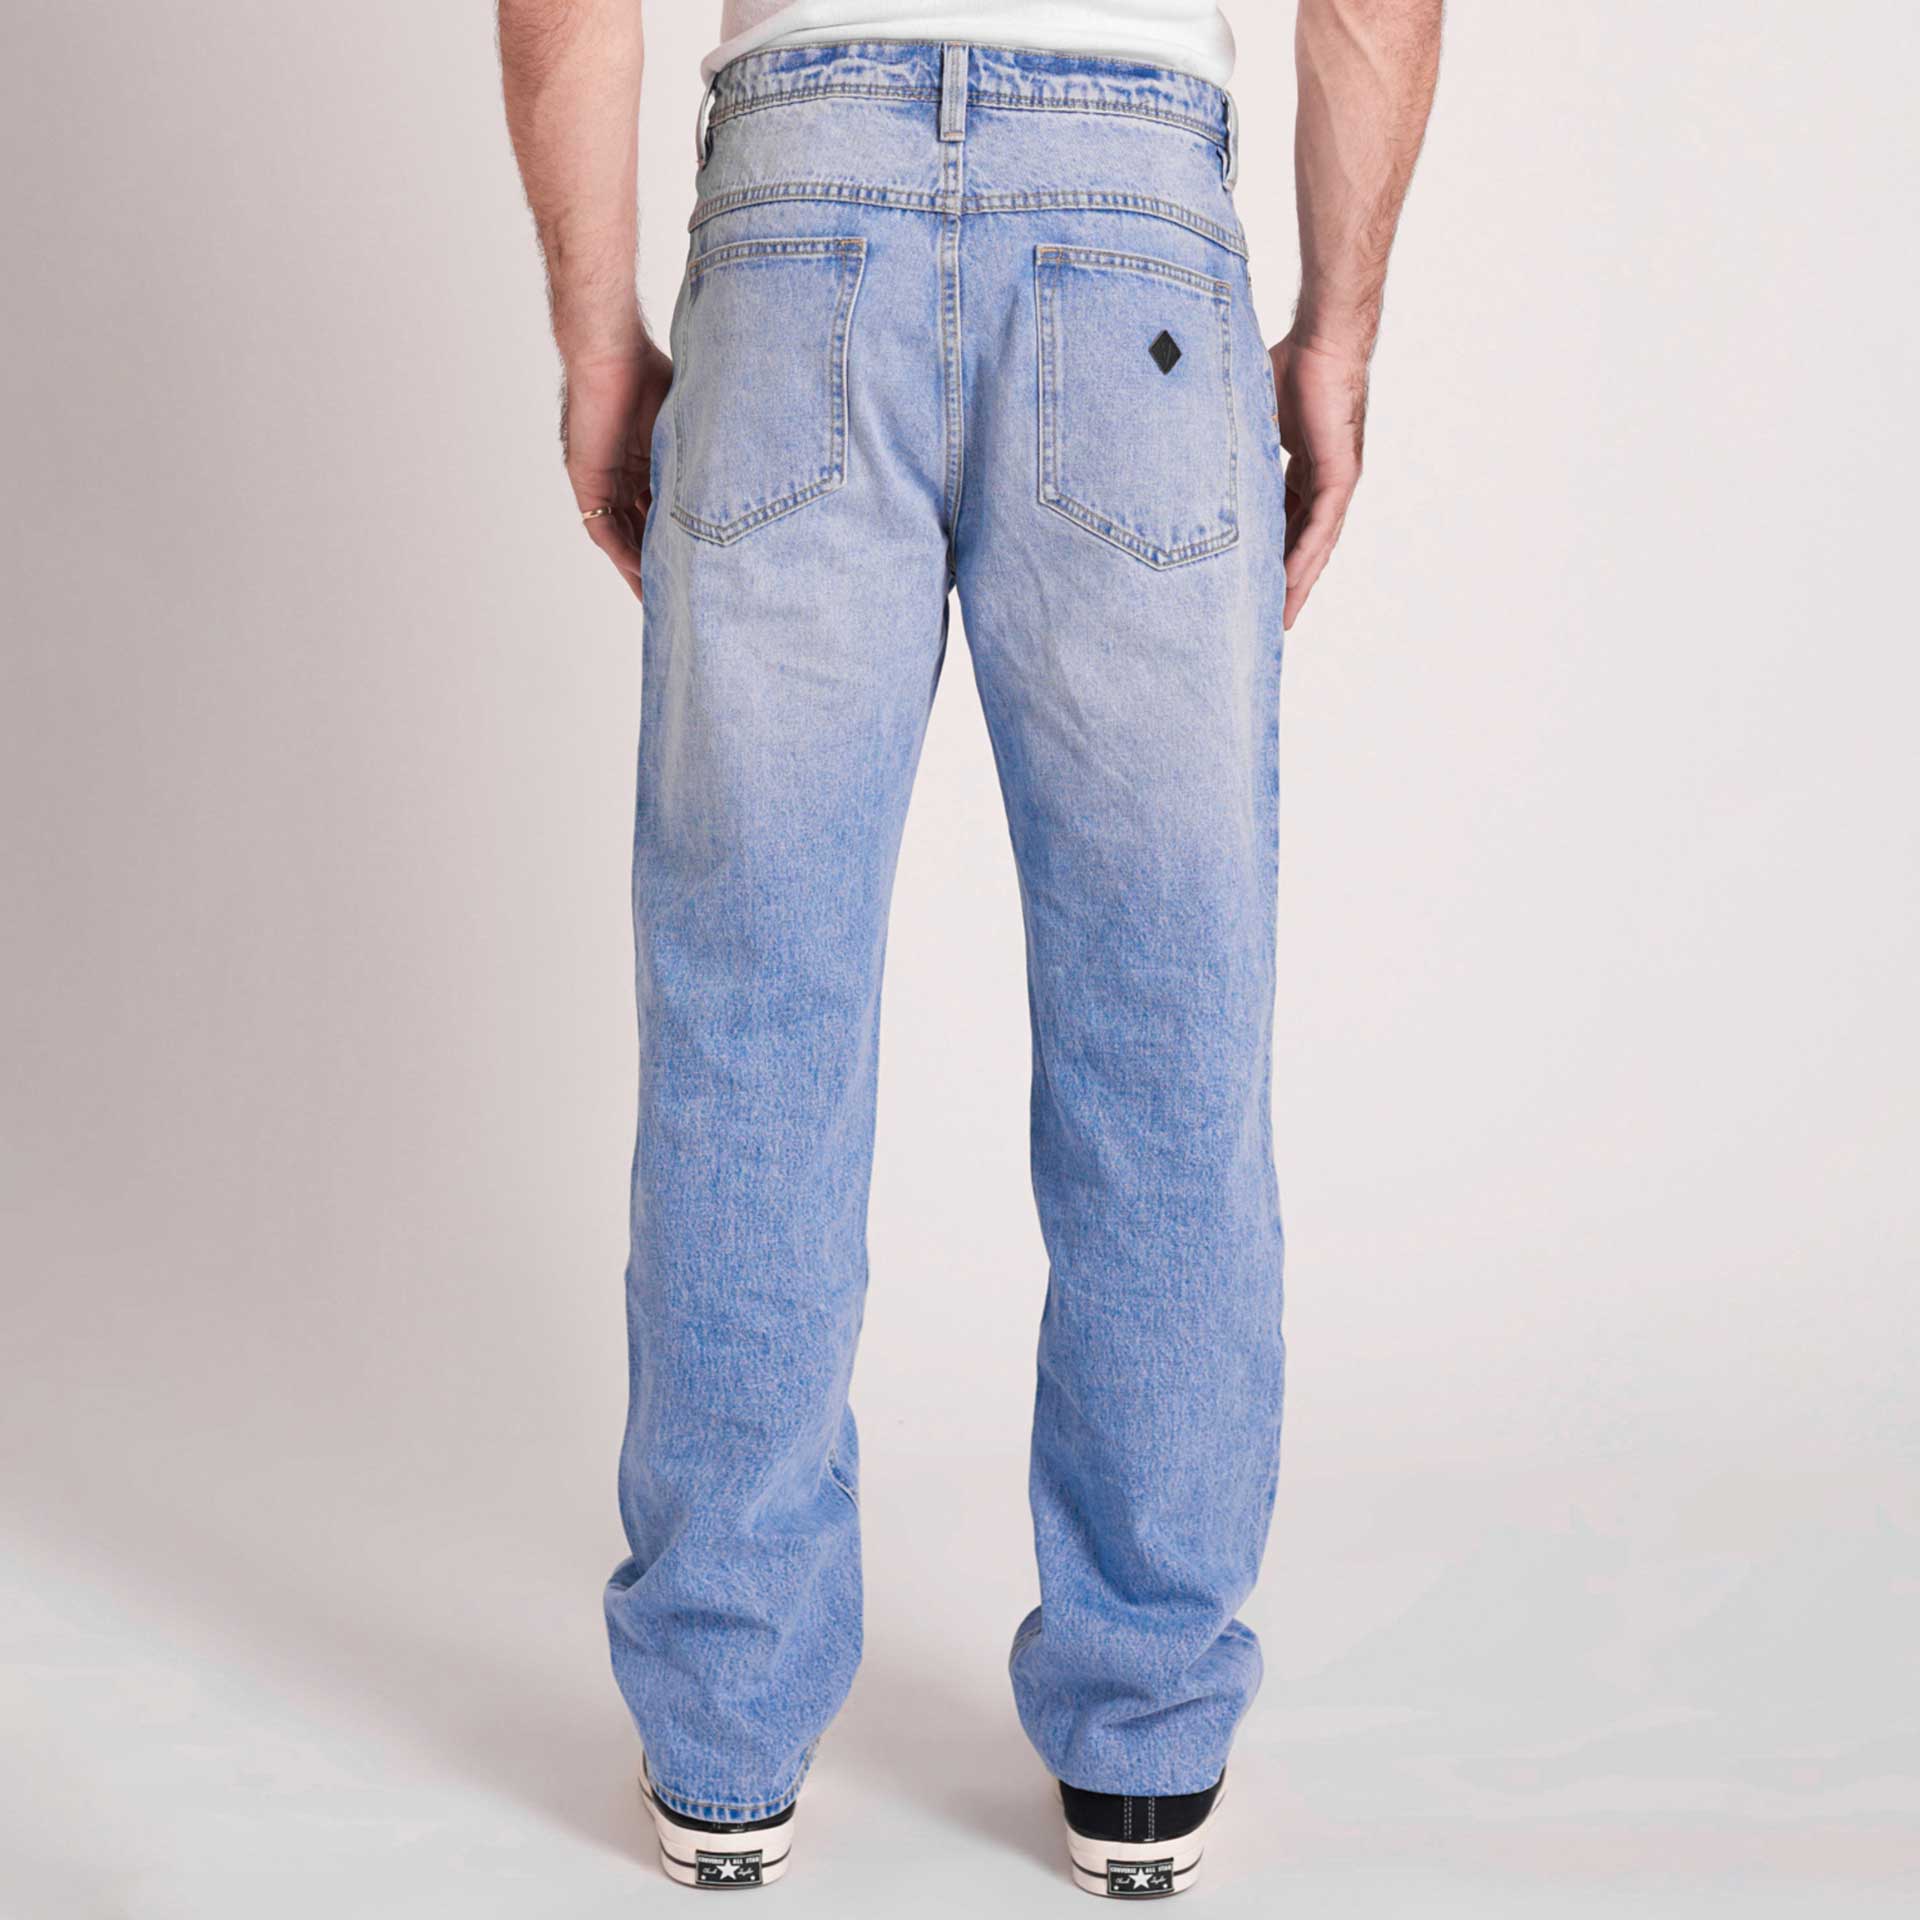 Abrand Jeans Baggy nevermind 2